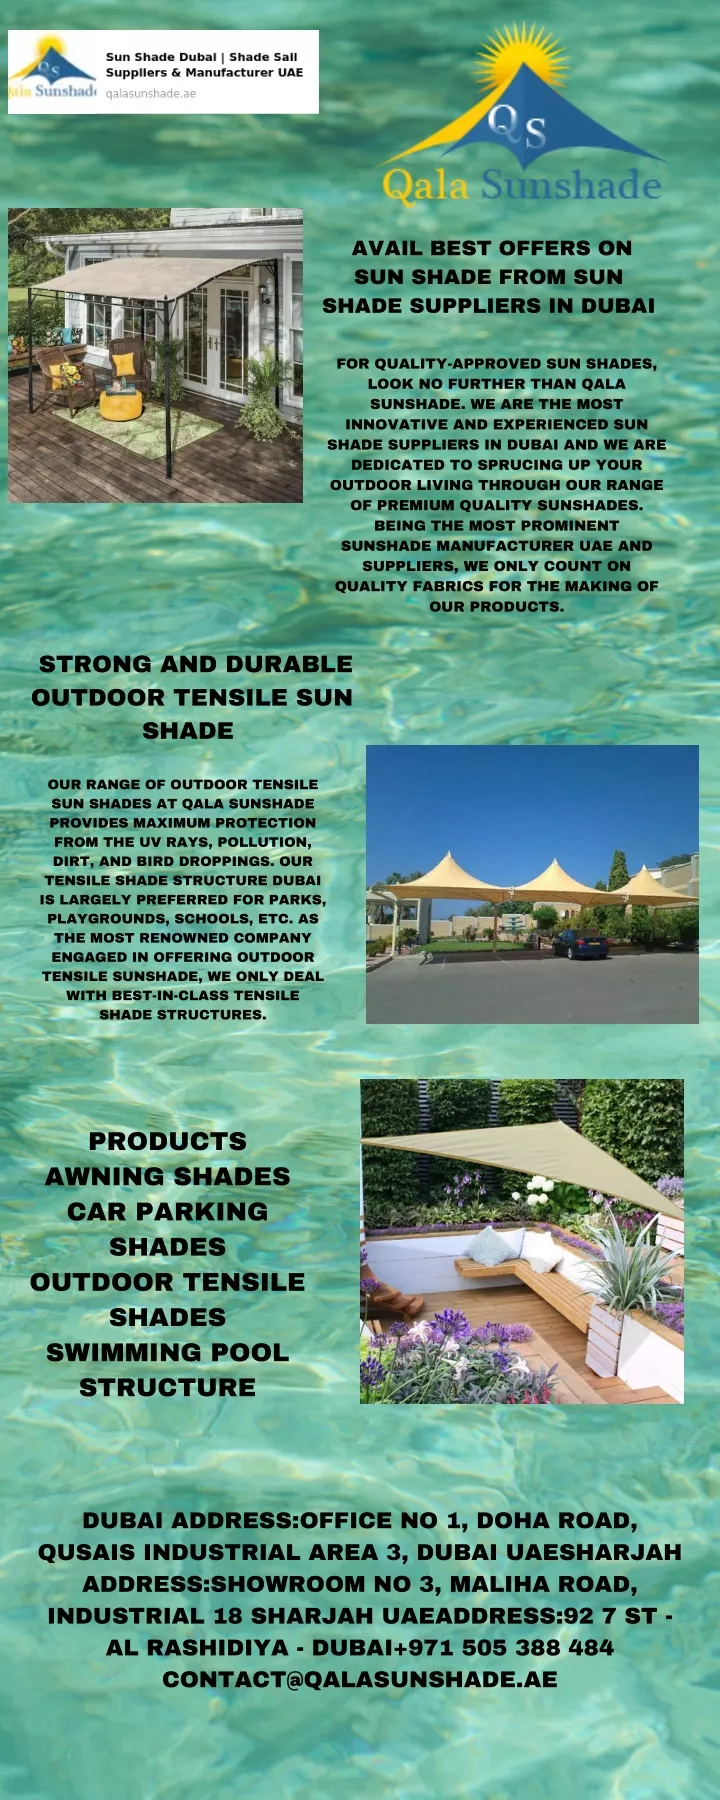 avail best offers on sun shade from sun shade